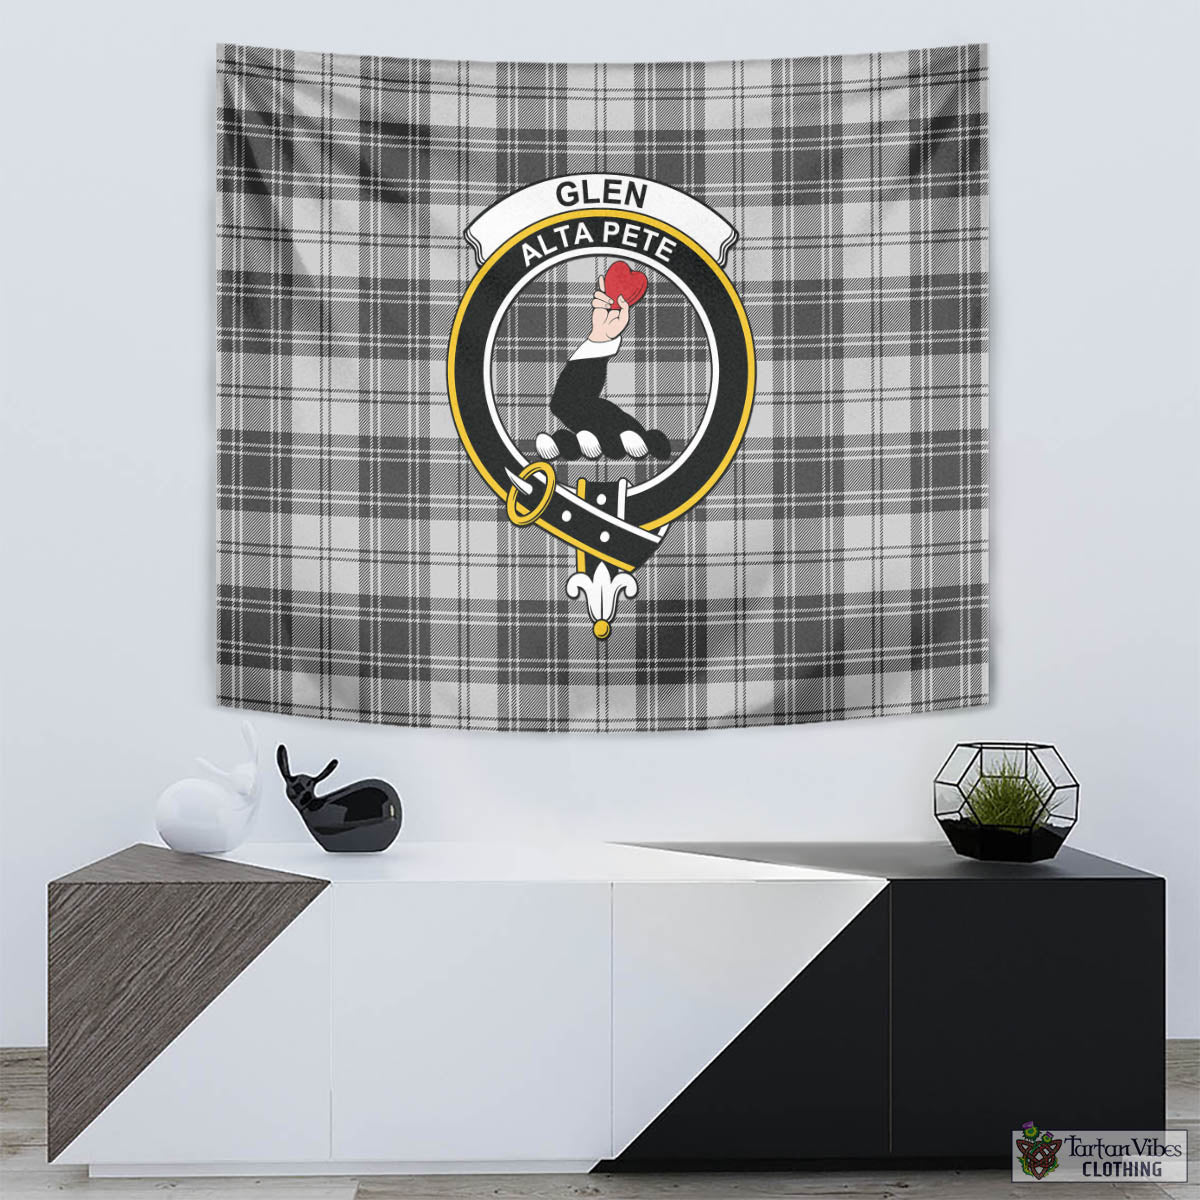 Tartan Vibes Clothing Glen Tartan Tapestry Wall Hanging and Home Decor for Room with Family Crest